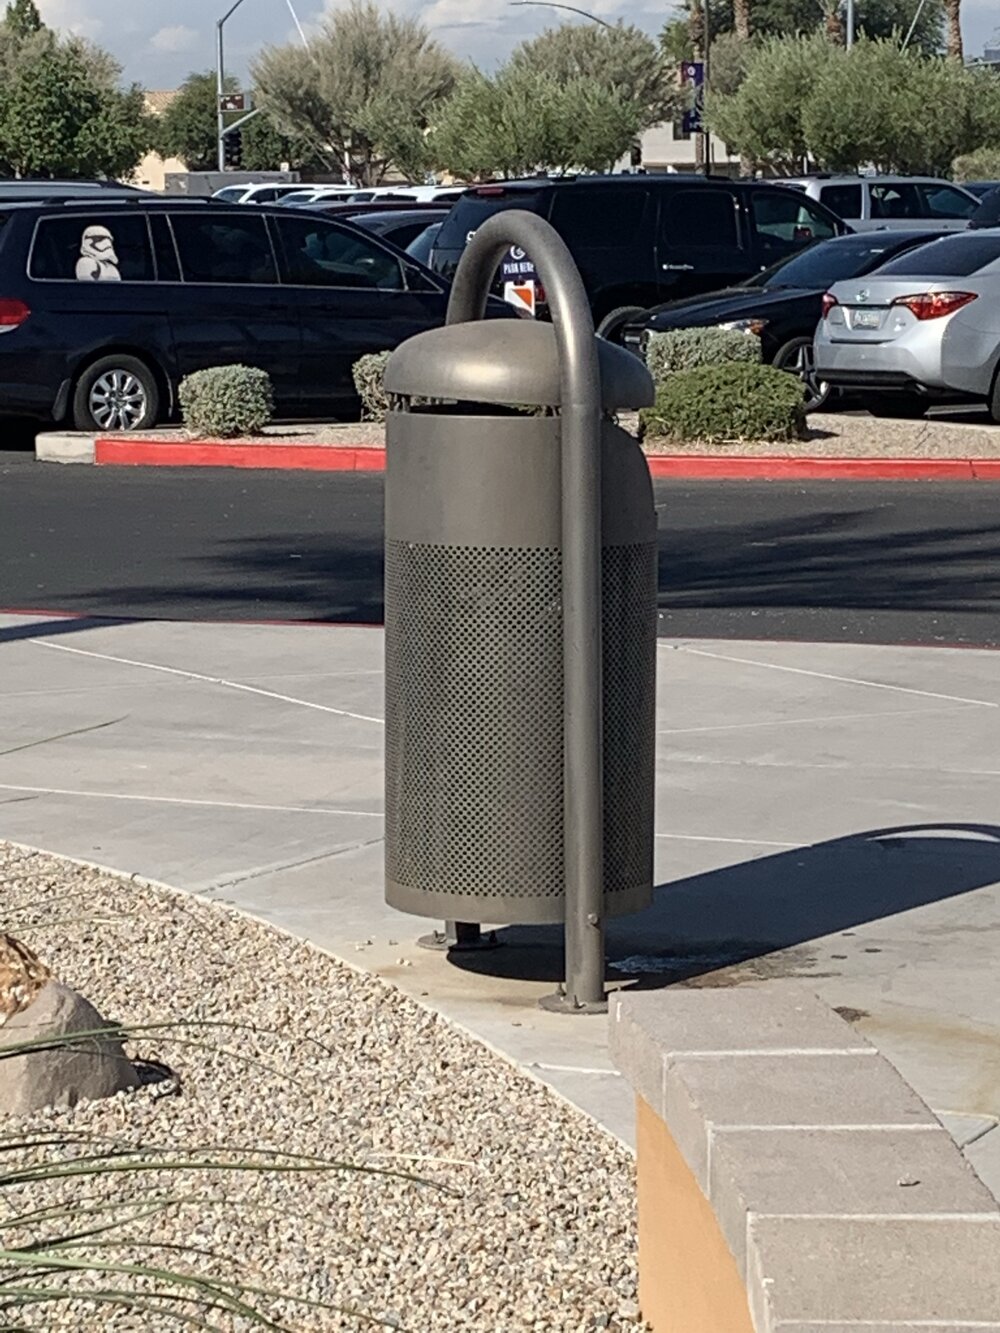 Here’s a good way to conceal a speaker at your campus when people arrive in the parking lot. This is from Cornerstone Christian Fellowship in Chandler AZ. These speakers were sending out the greatest music when I arrived last month at the S2 Conference. Great idea!